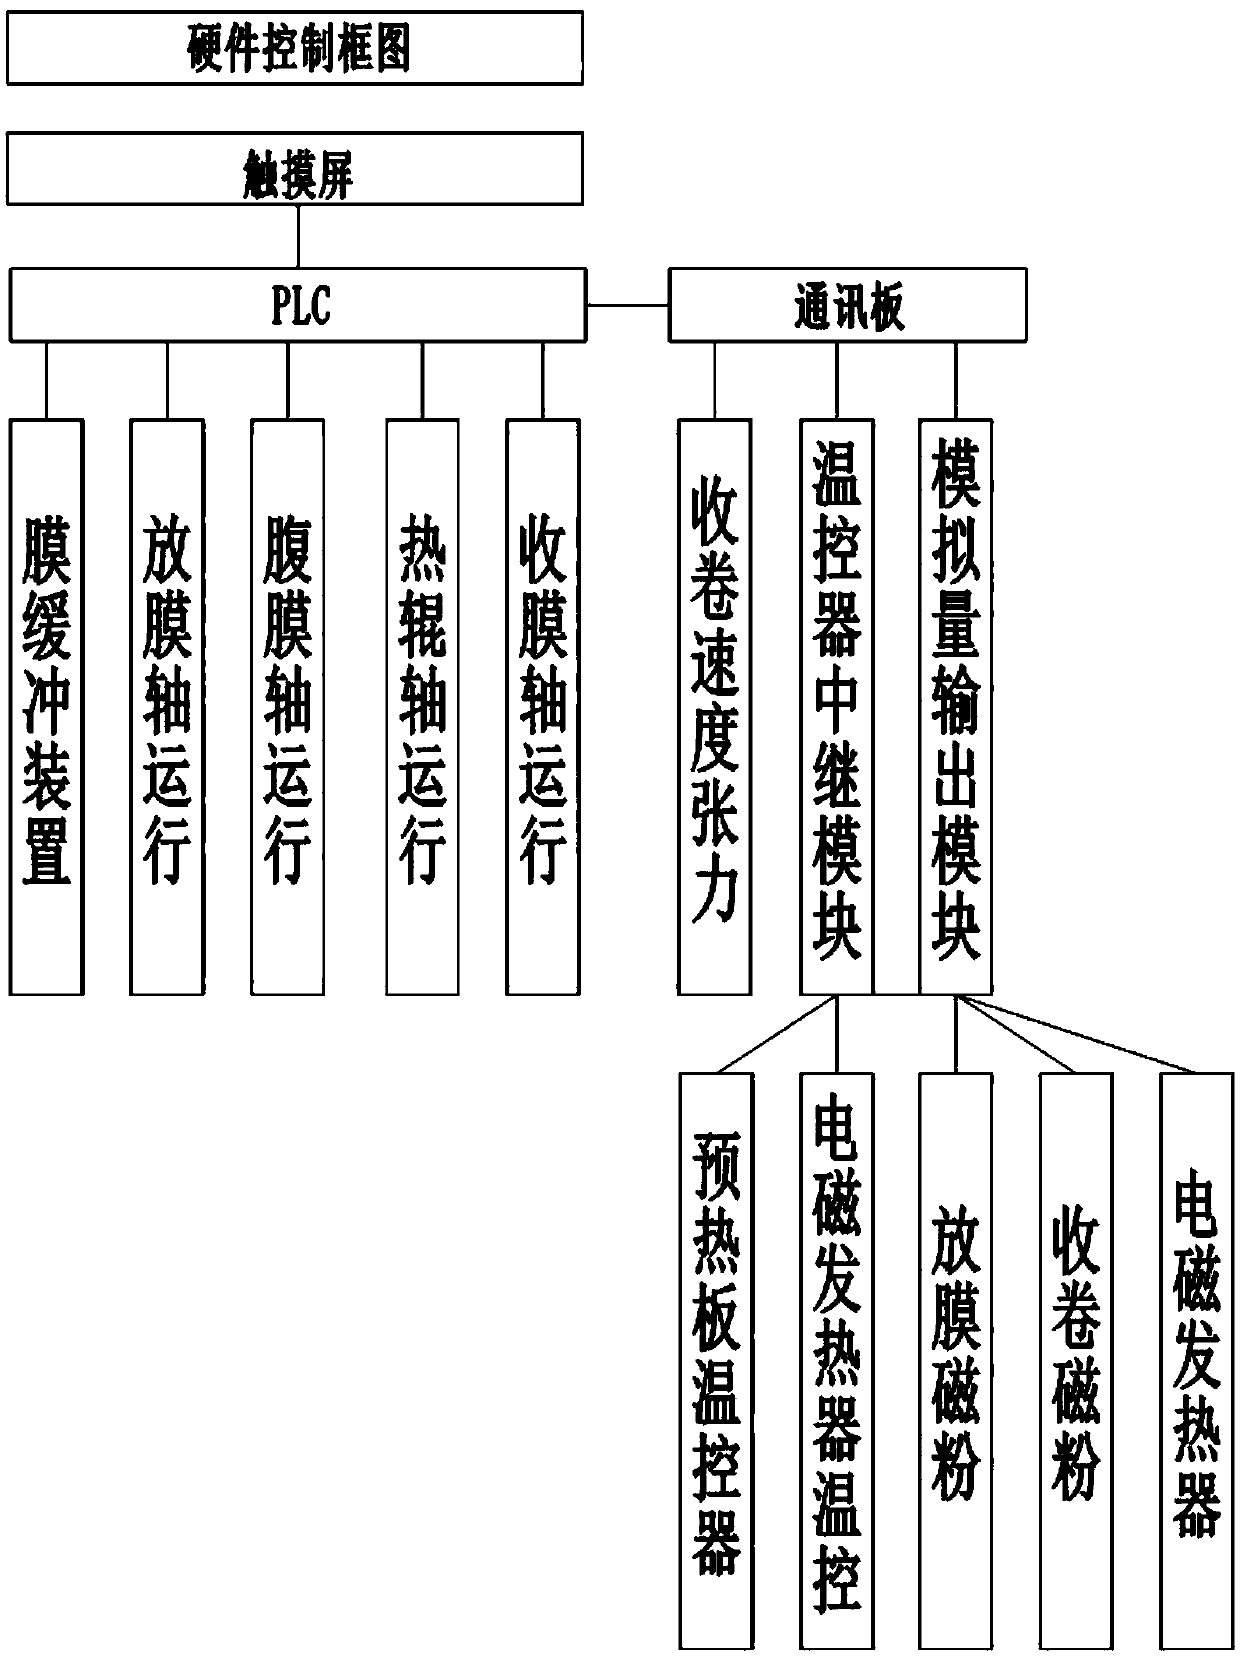 Five-shaft high-speed laminating machine and control method